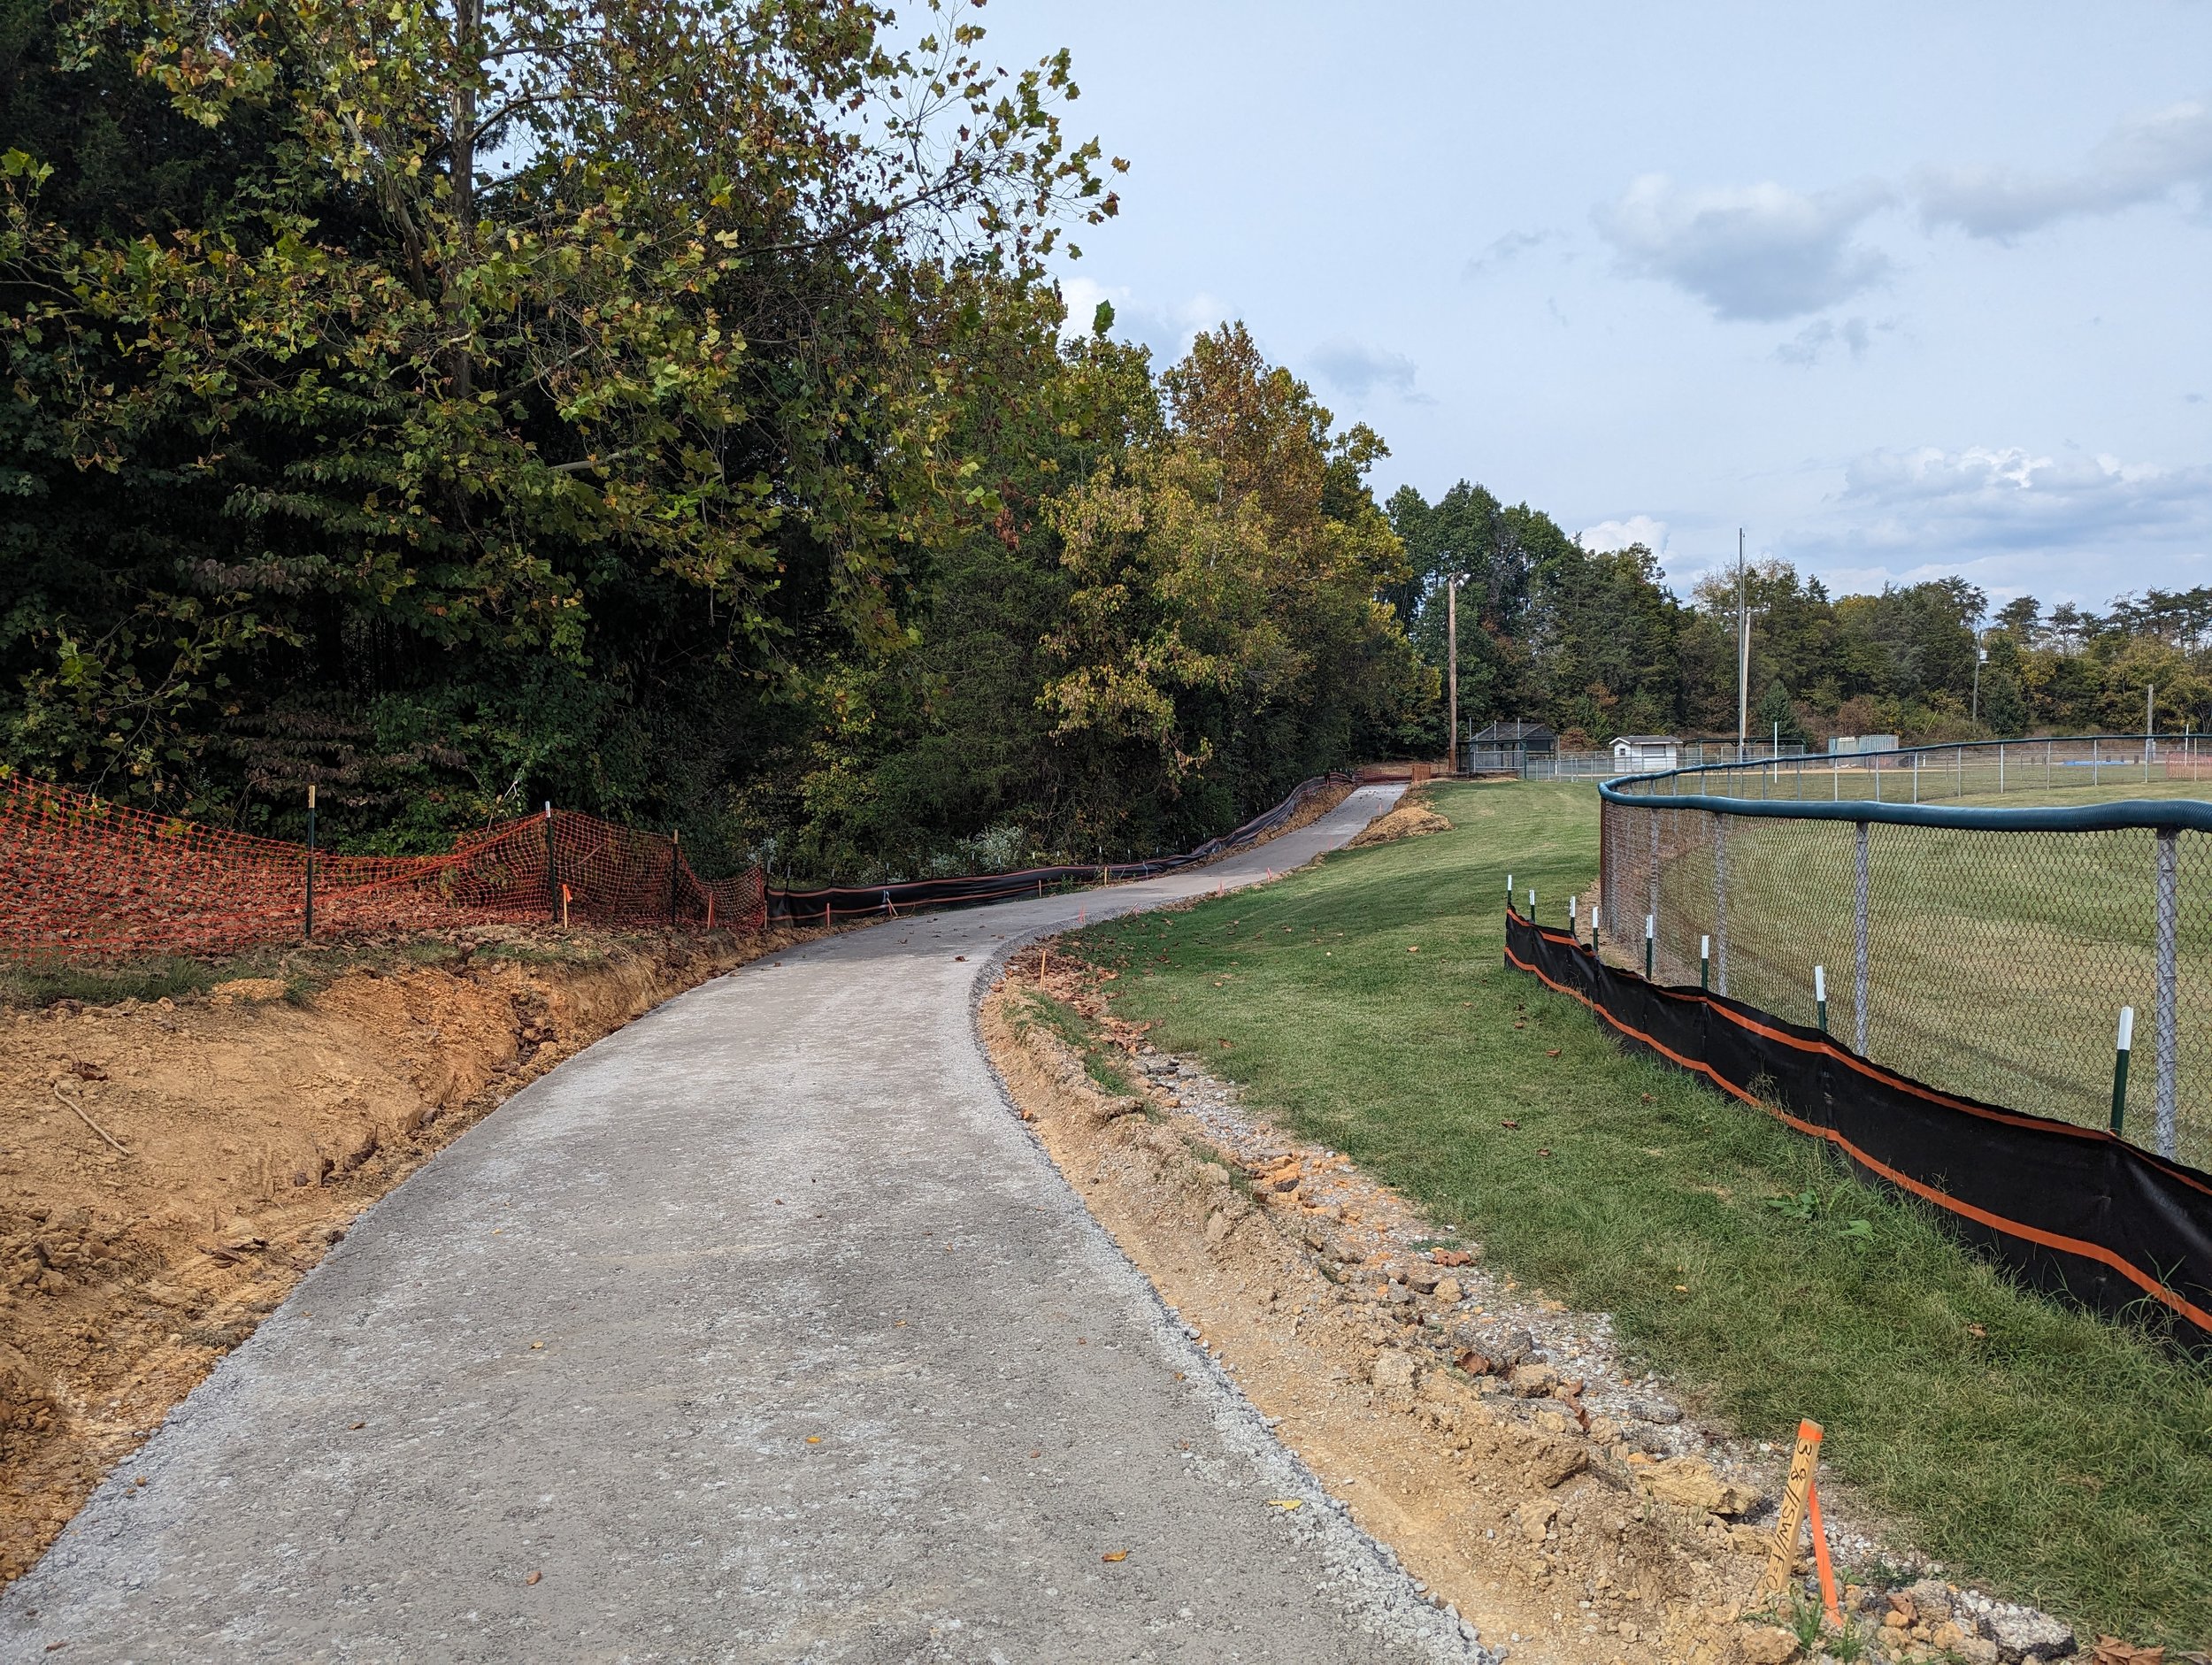 10/5/2023 - Base stone for the regraded walking trail is in place ready for asphalt placement to begin.